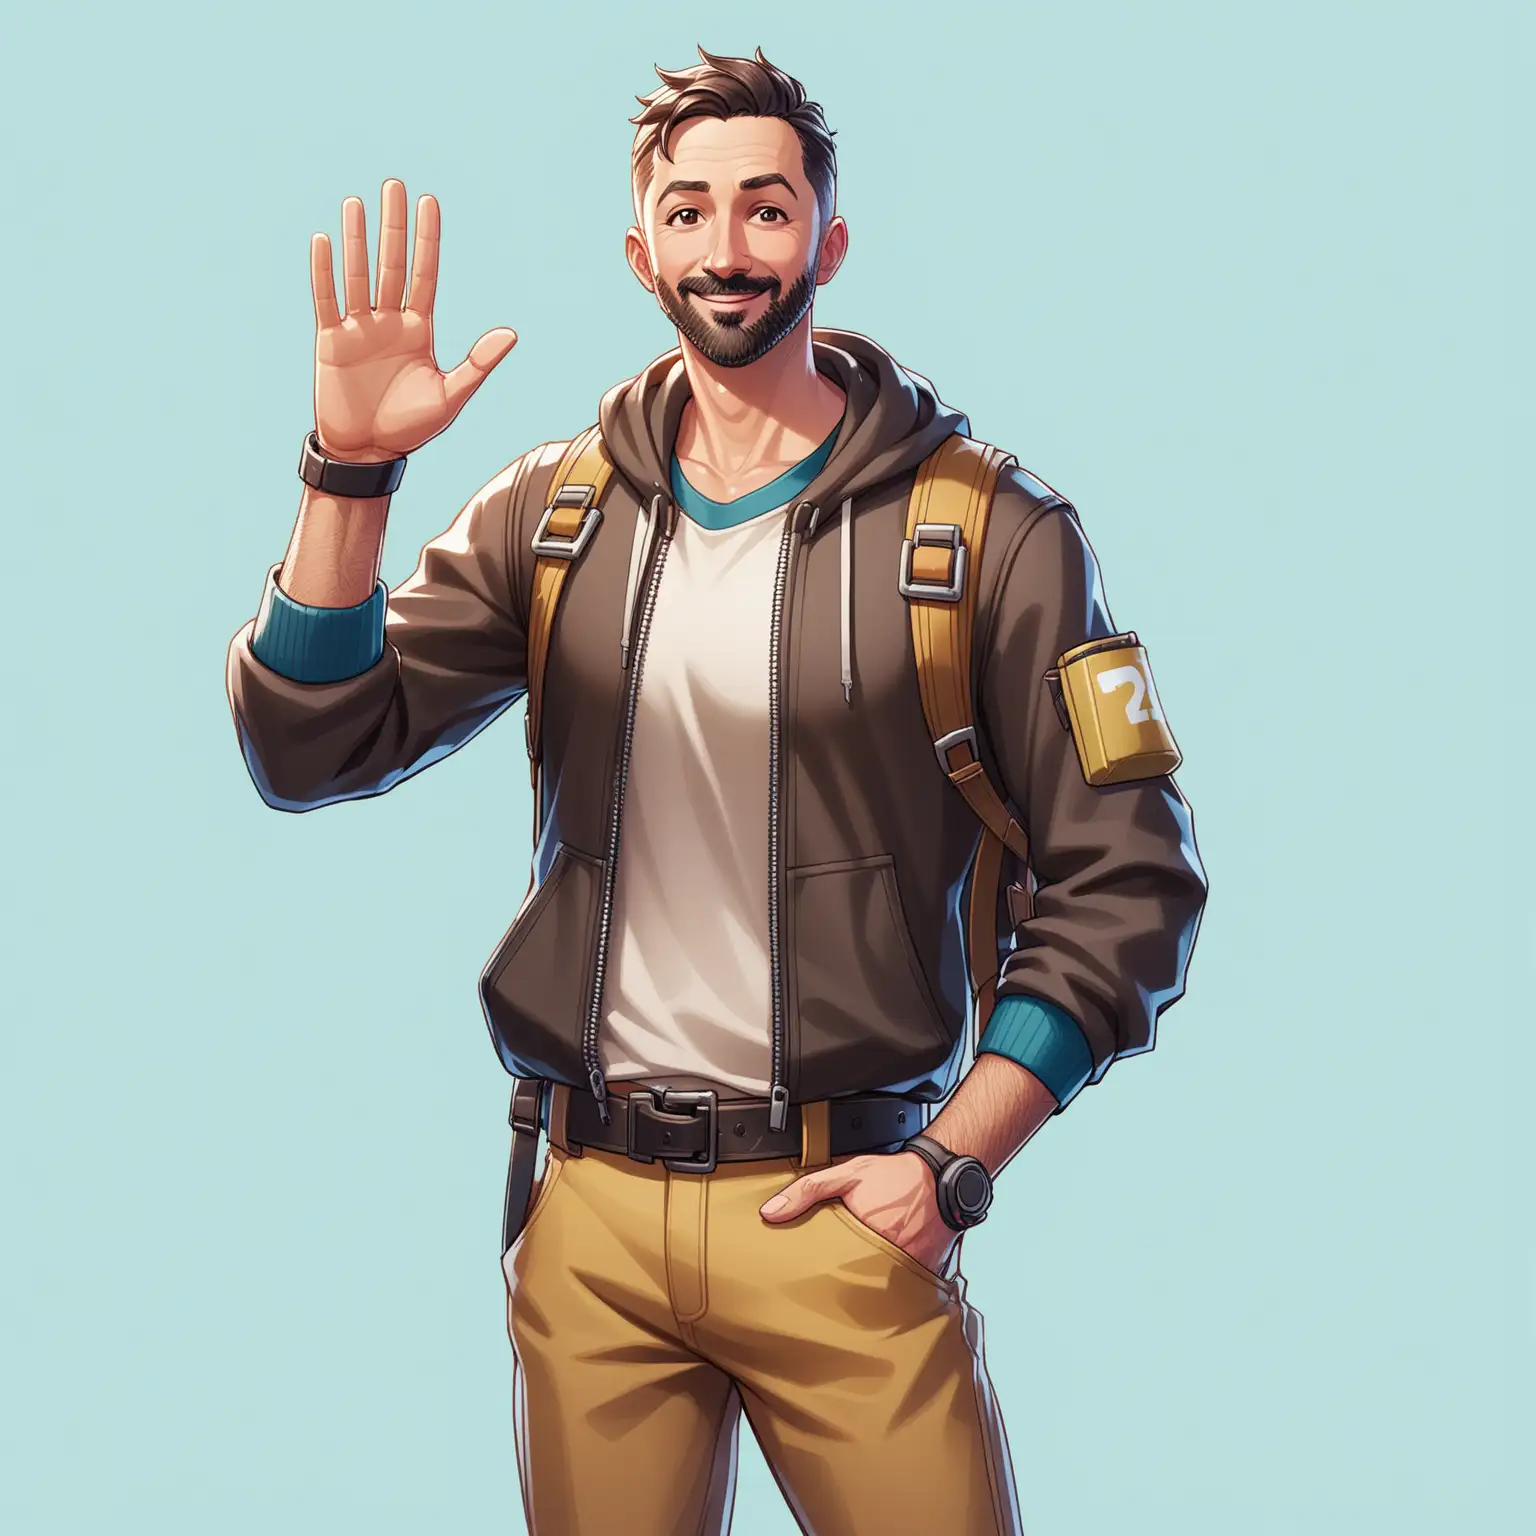 40 year old male fully casually clothed skinny Fortnite character waving, no background

